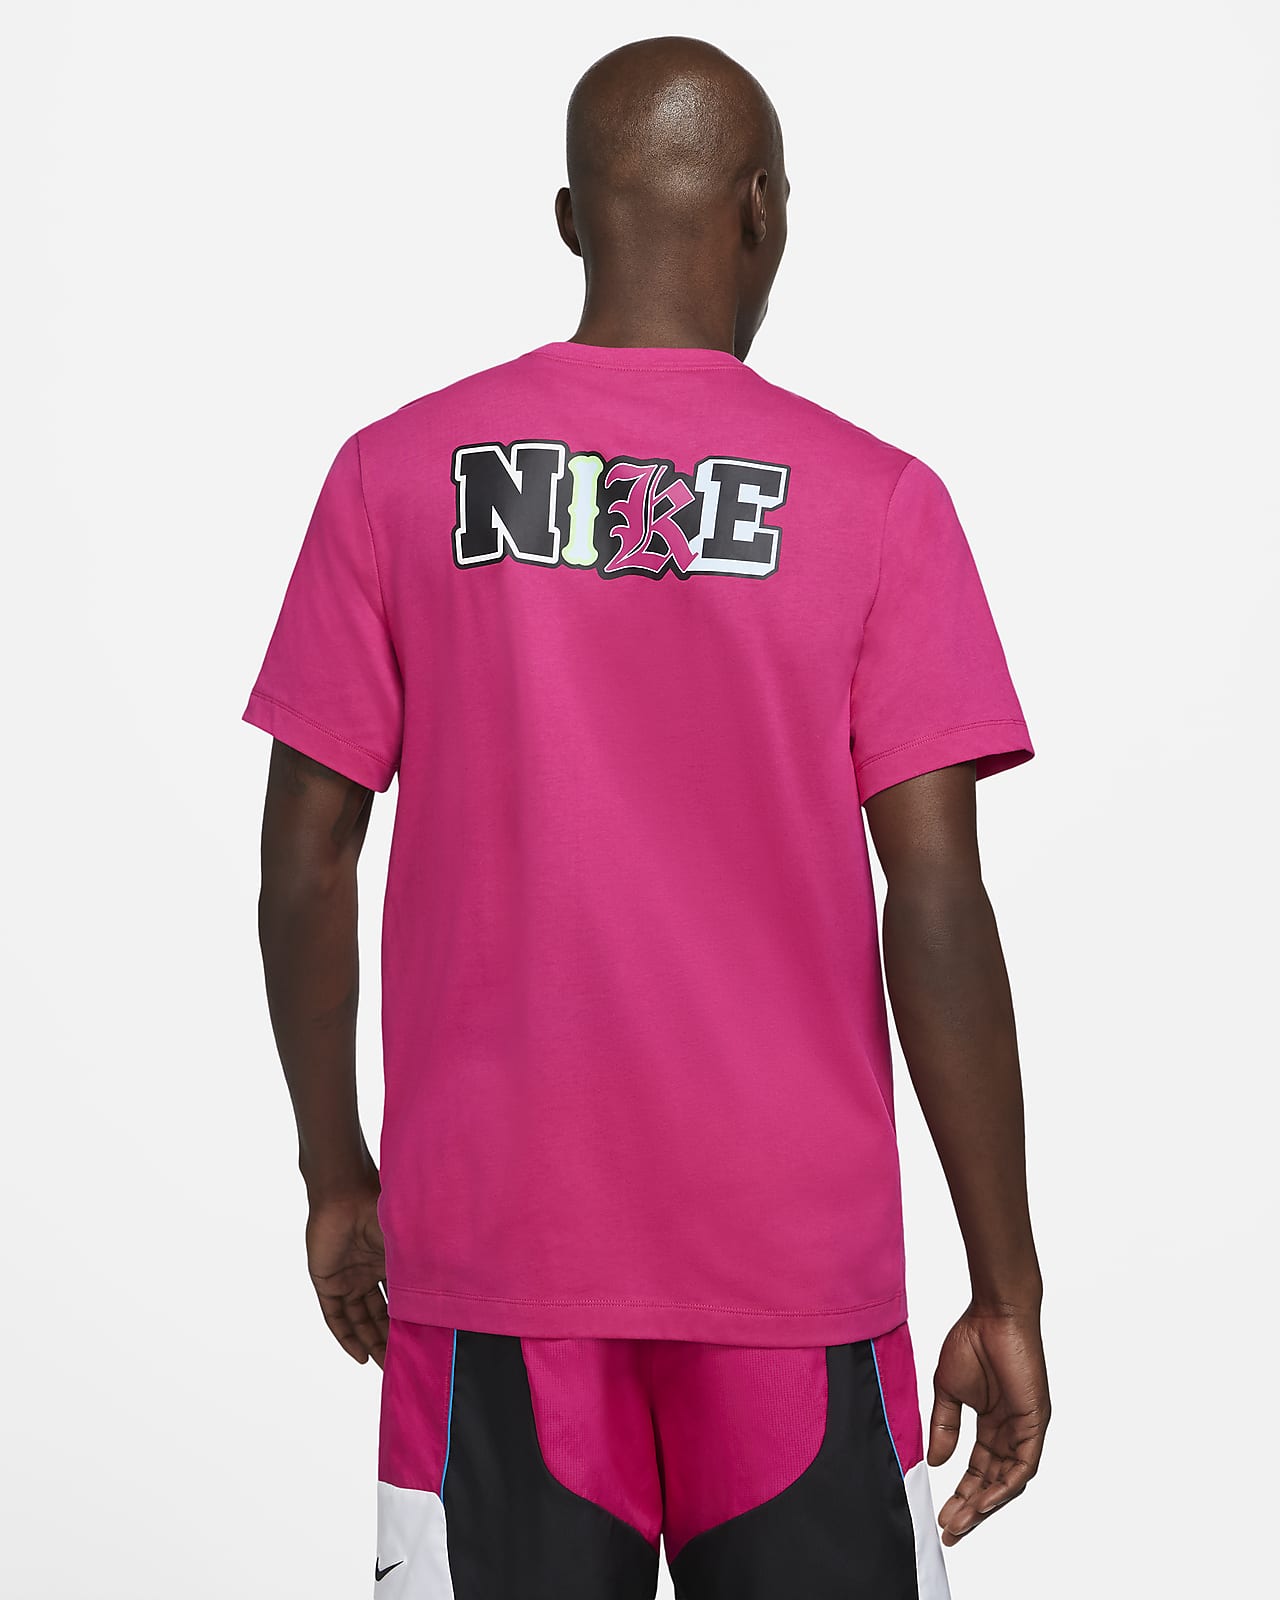 nike blue and pink shirt